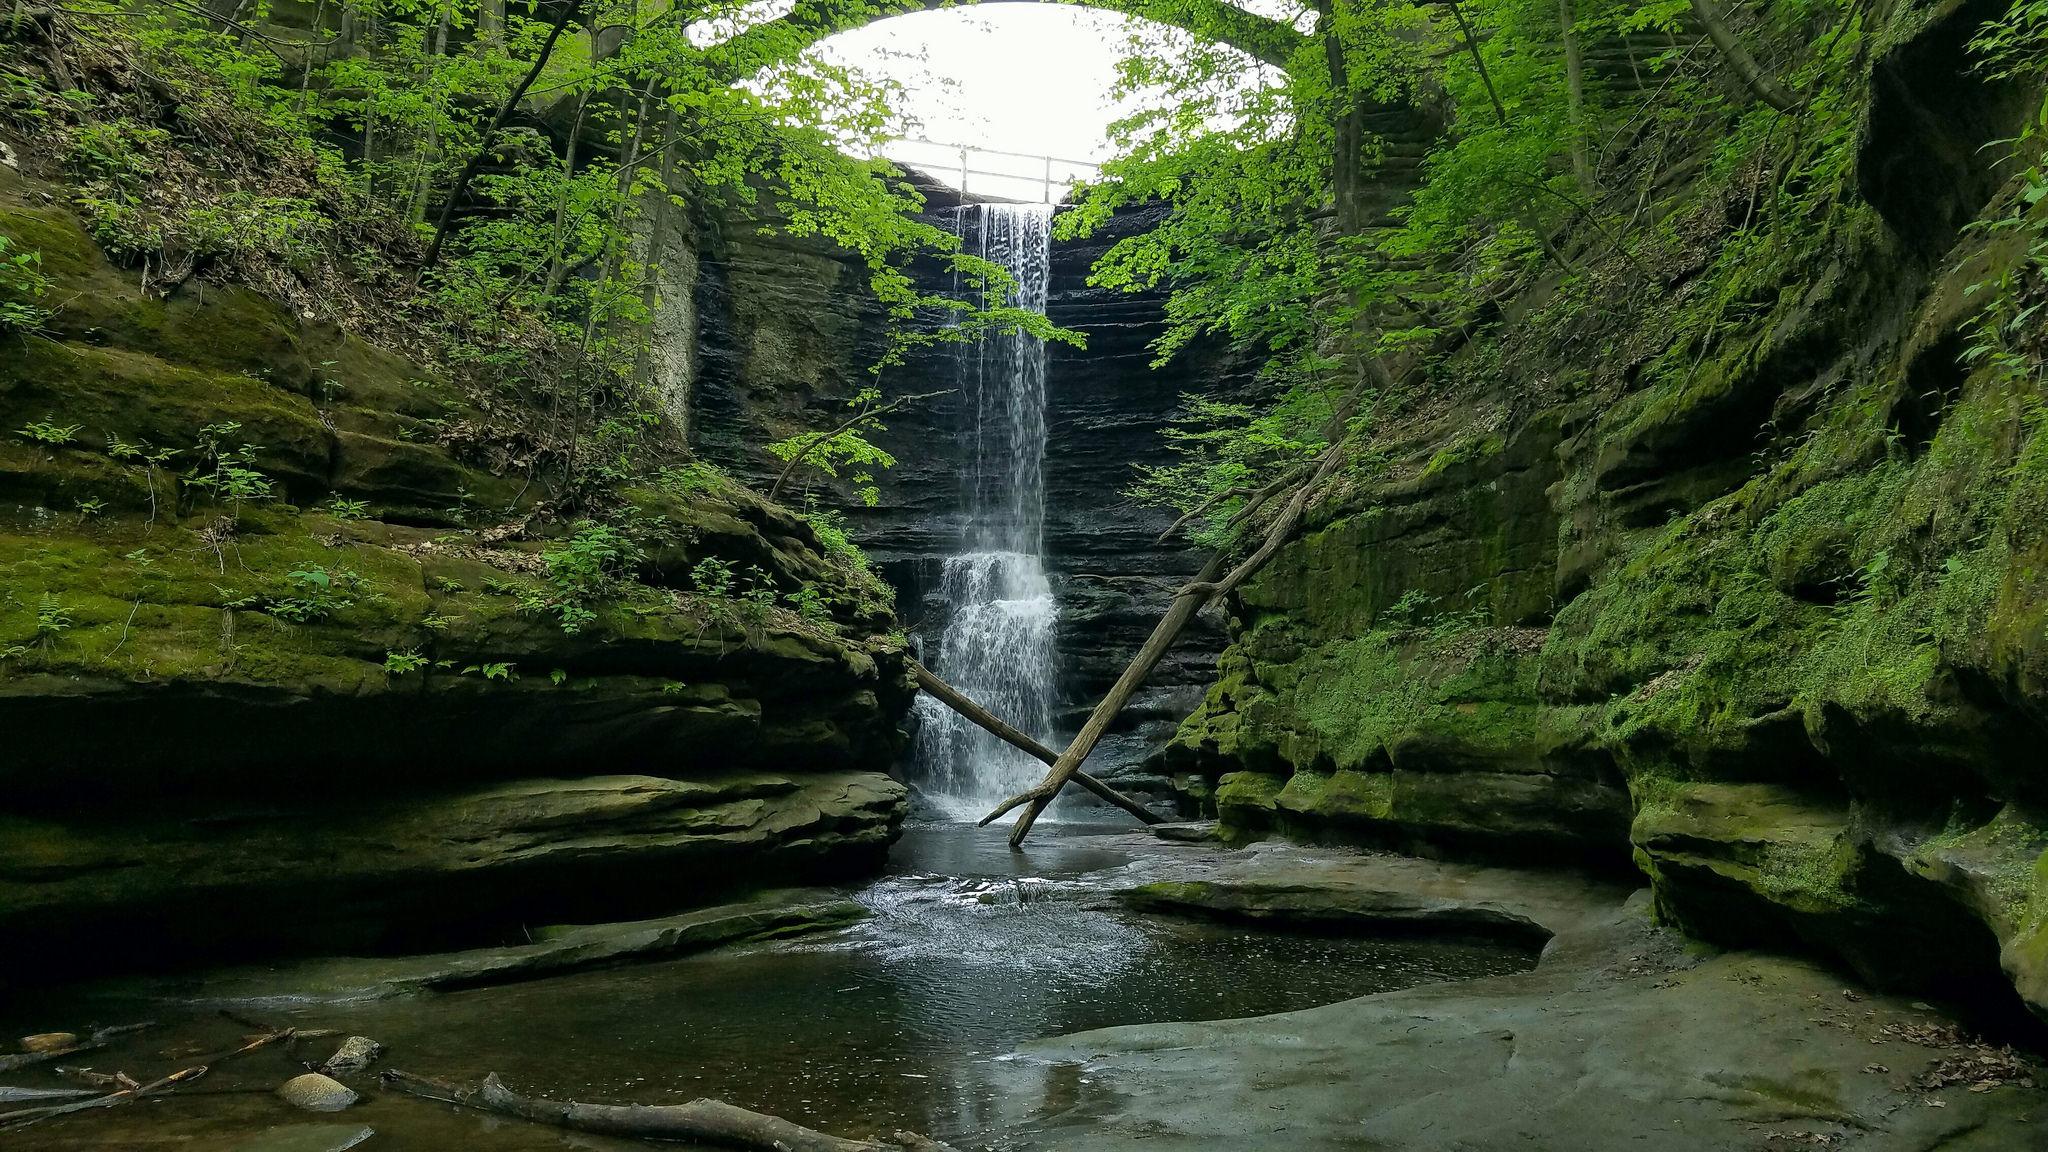 A waterfall in Starved Rock State Park. (Arturo Hurtado / Flickr)